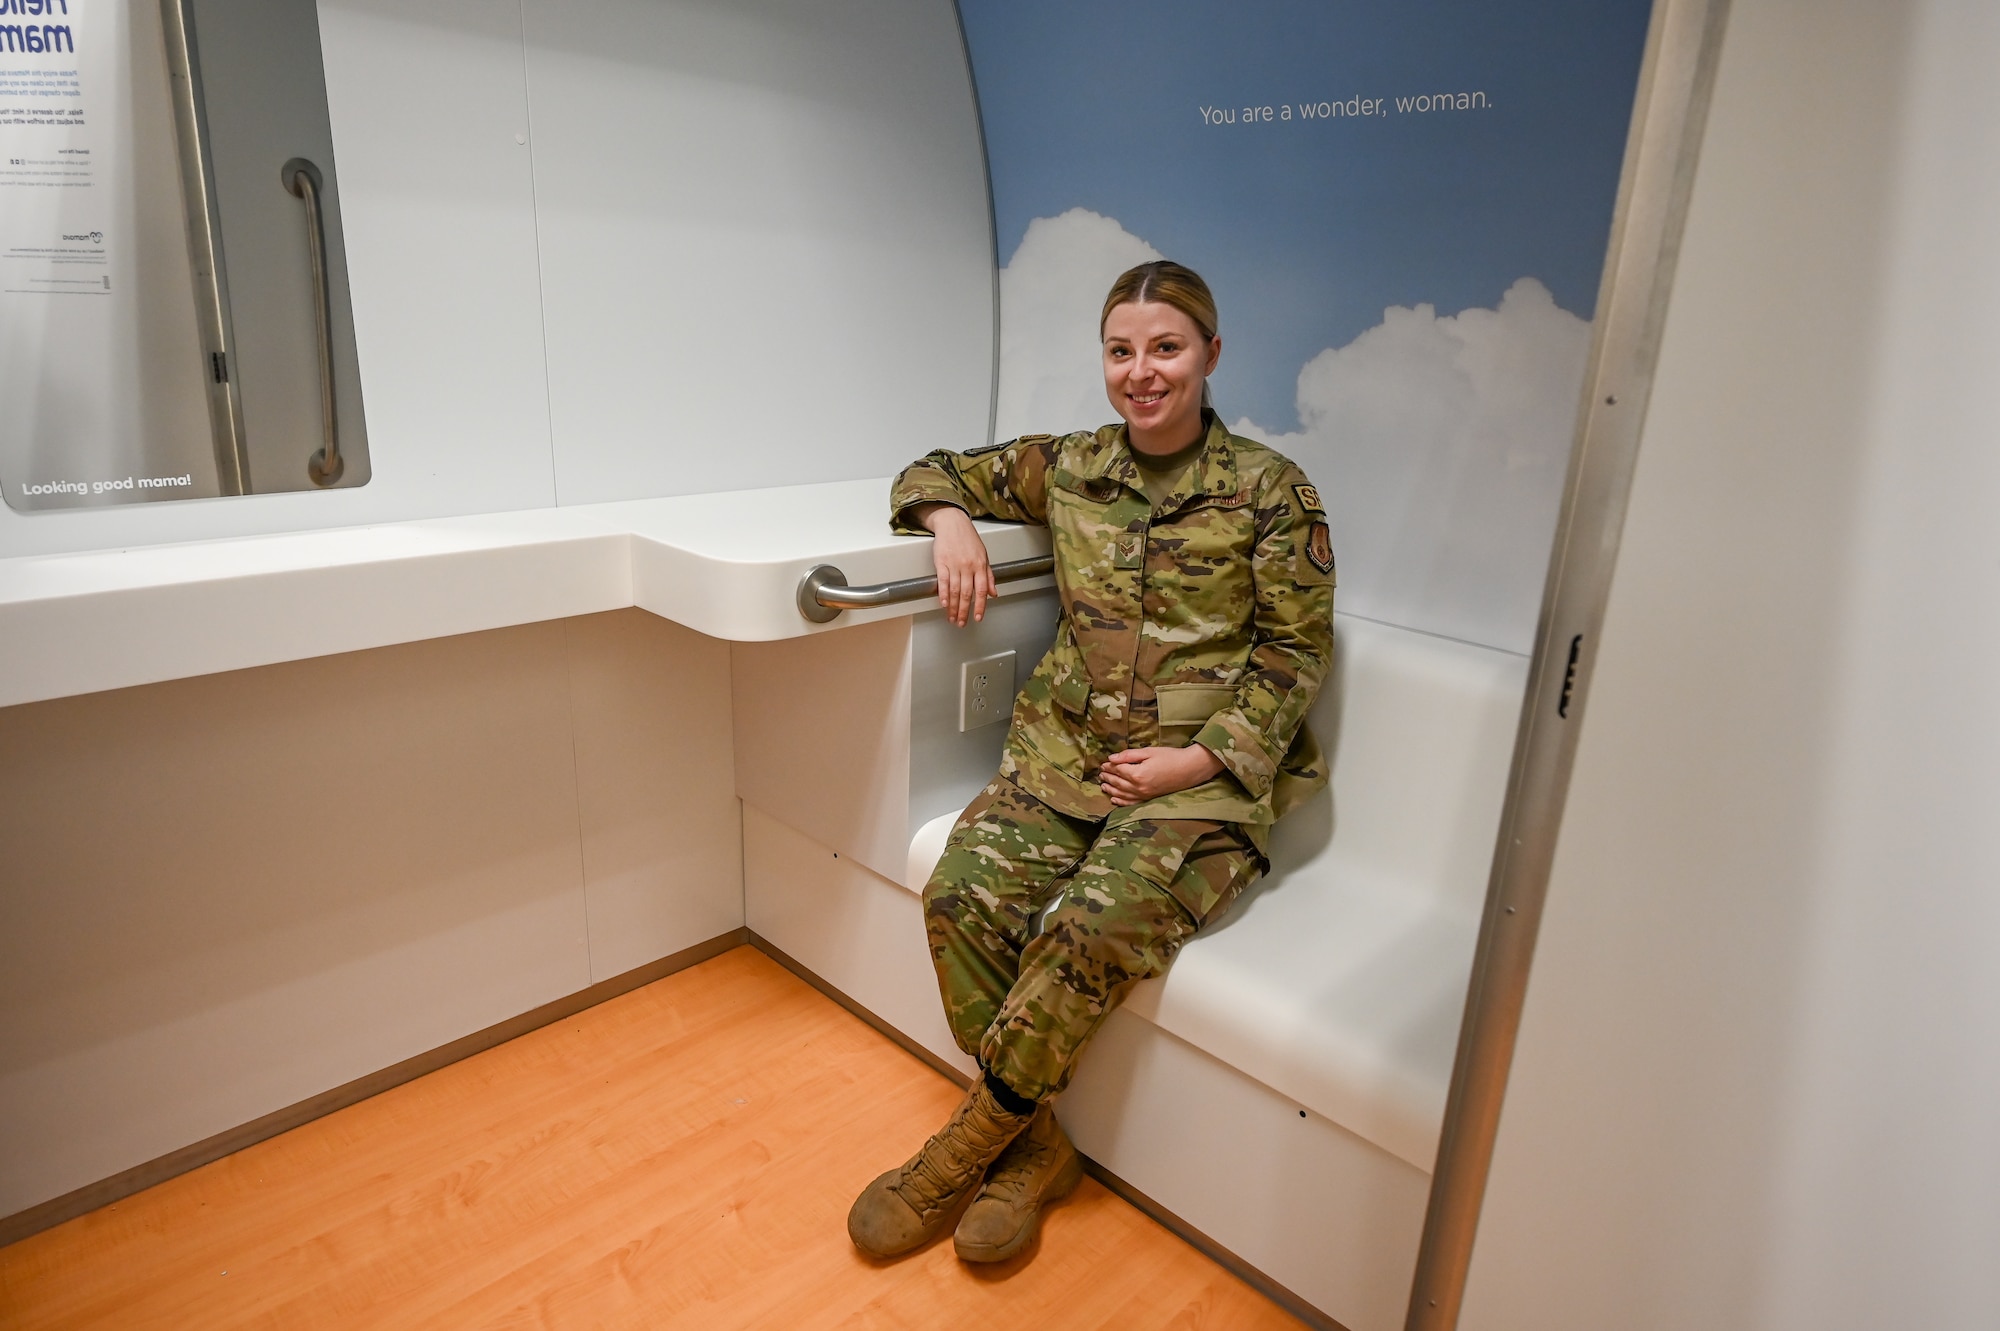 Senior Airman Brice Larimer, 75th Security Forces Squadron, an expectant mother, poses inside the new lactation pod June 28, 2021, located at building 430 at Hill Air Force Base, Utah. The pod features two comfortable benches, wall outlets and a locked door to ensure privacy and will be open during building 430 working hours. (U.S. Air Force photo by Cynthia Griggs)